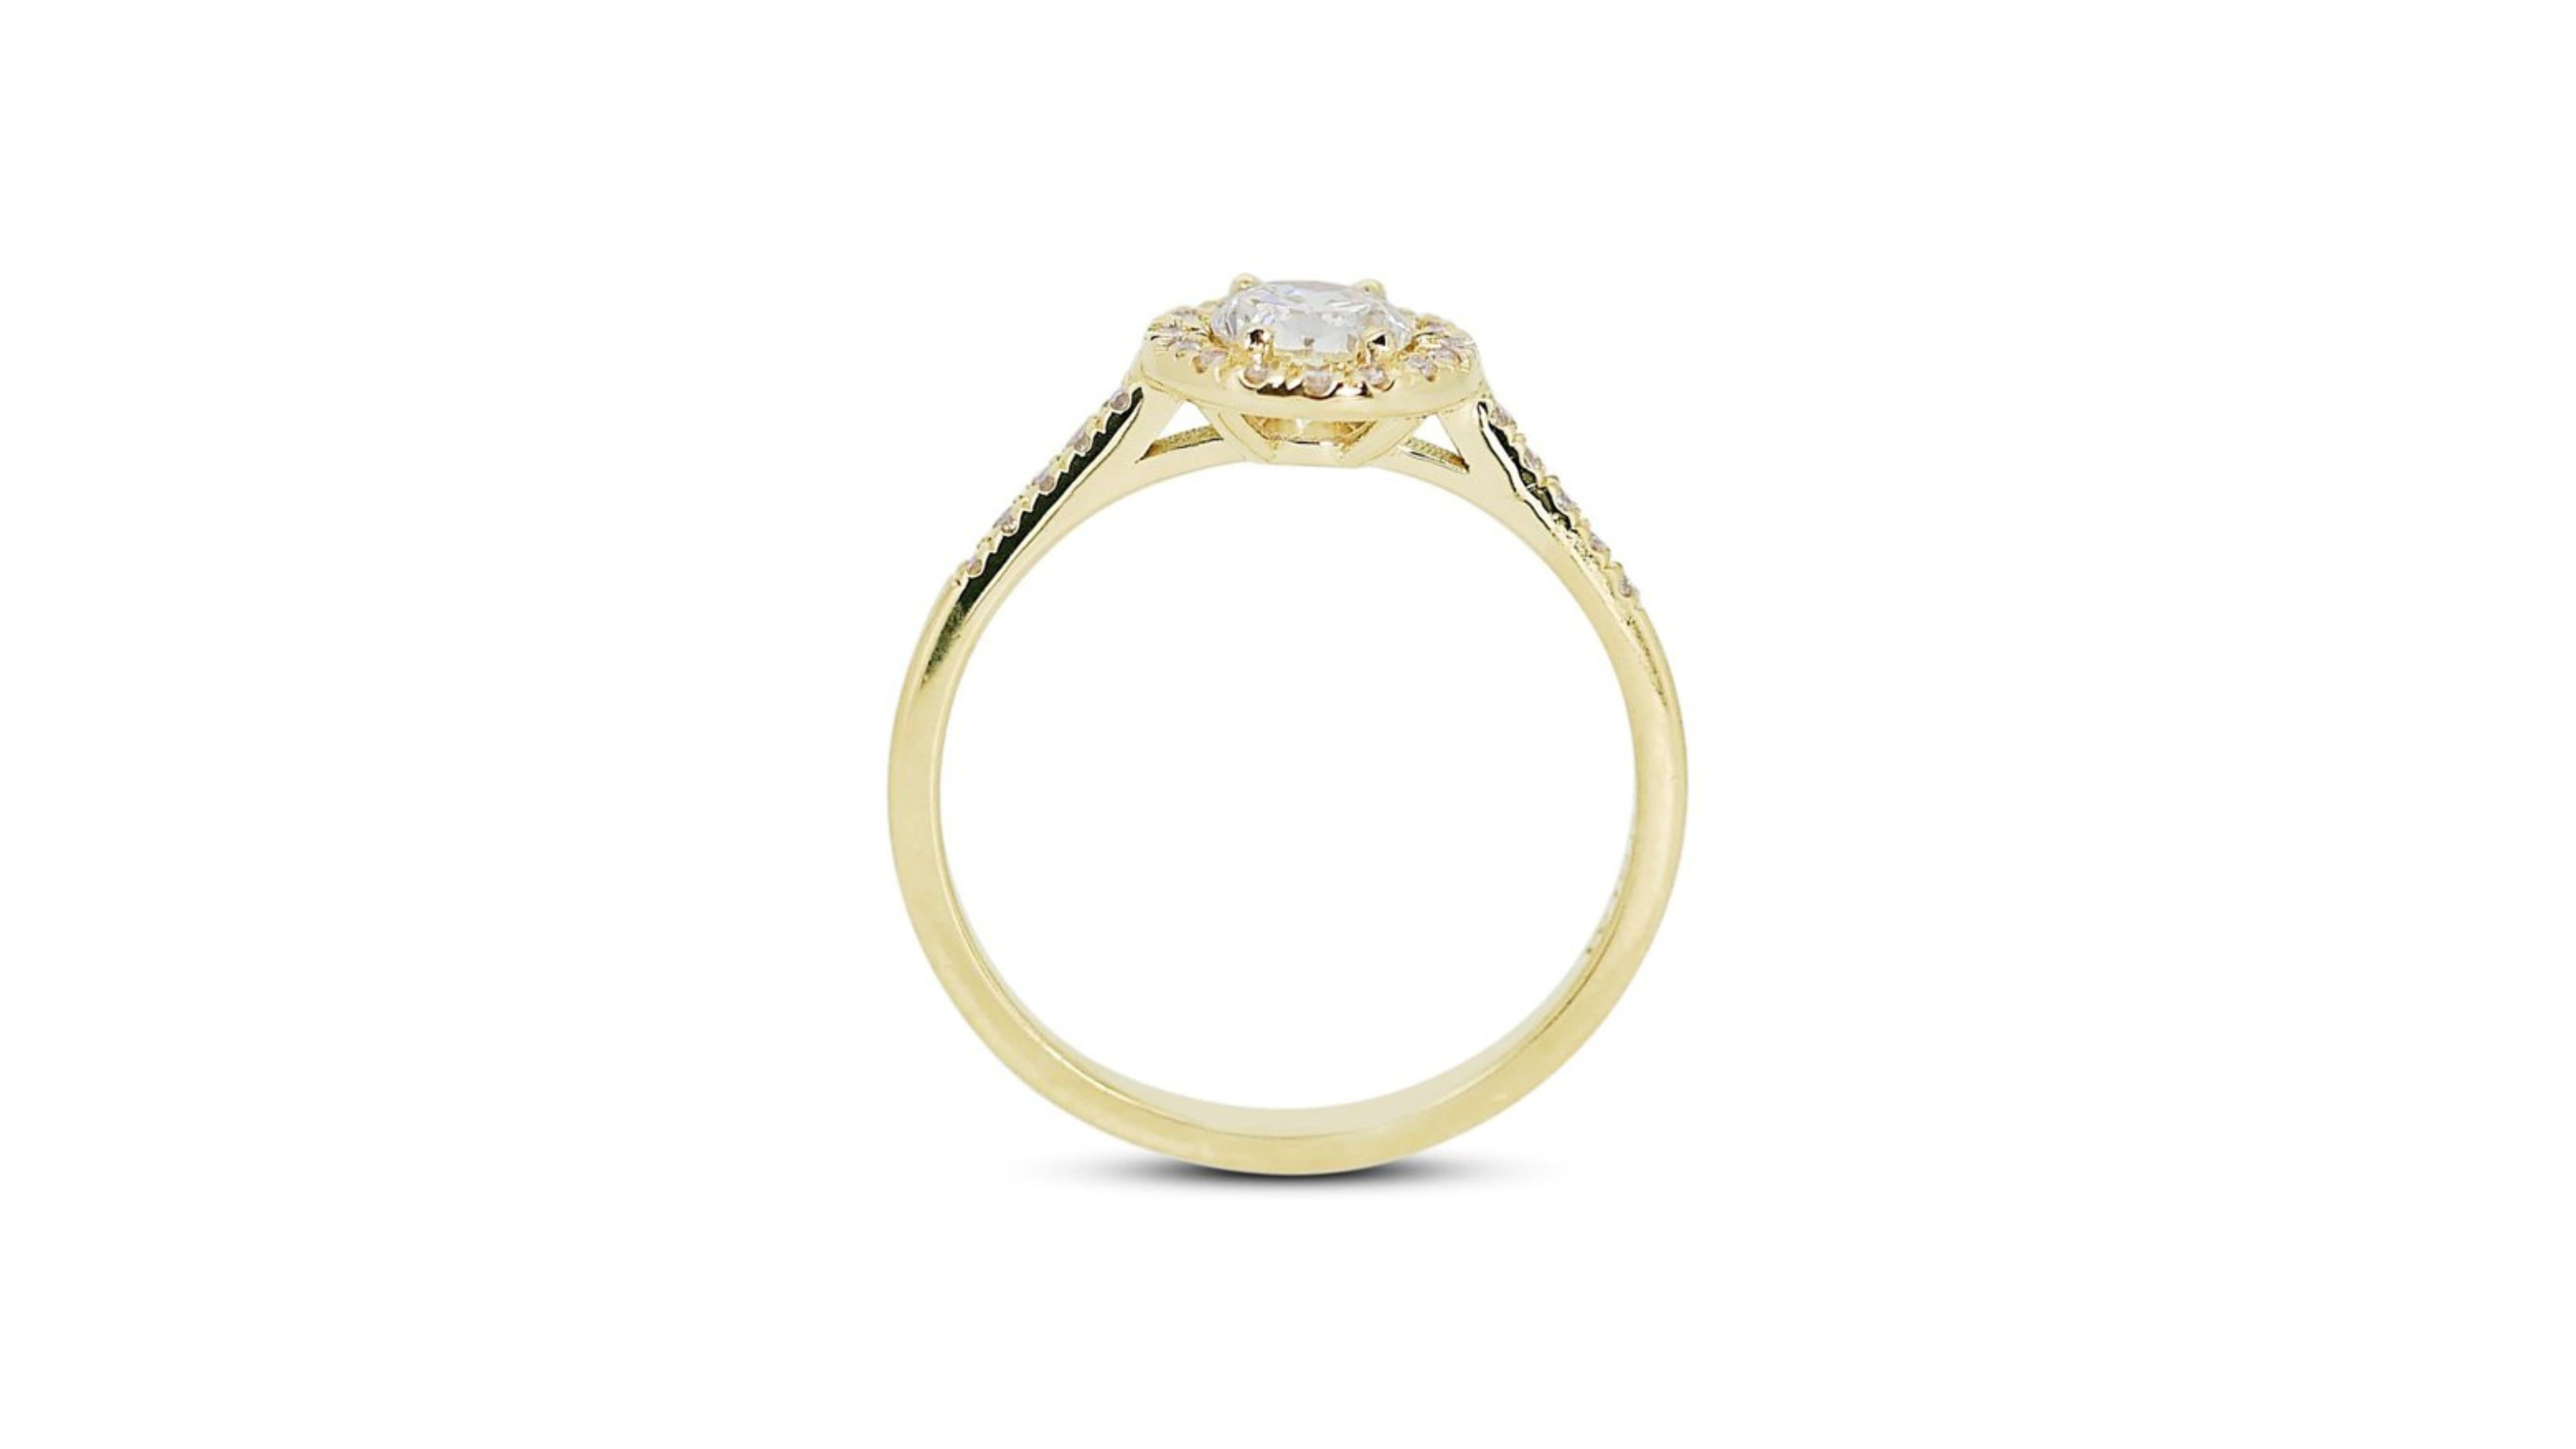 Marvelous 18k Yellow Gold Ring with 2.6 carat Natural Diamond For Sale 1